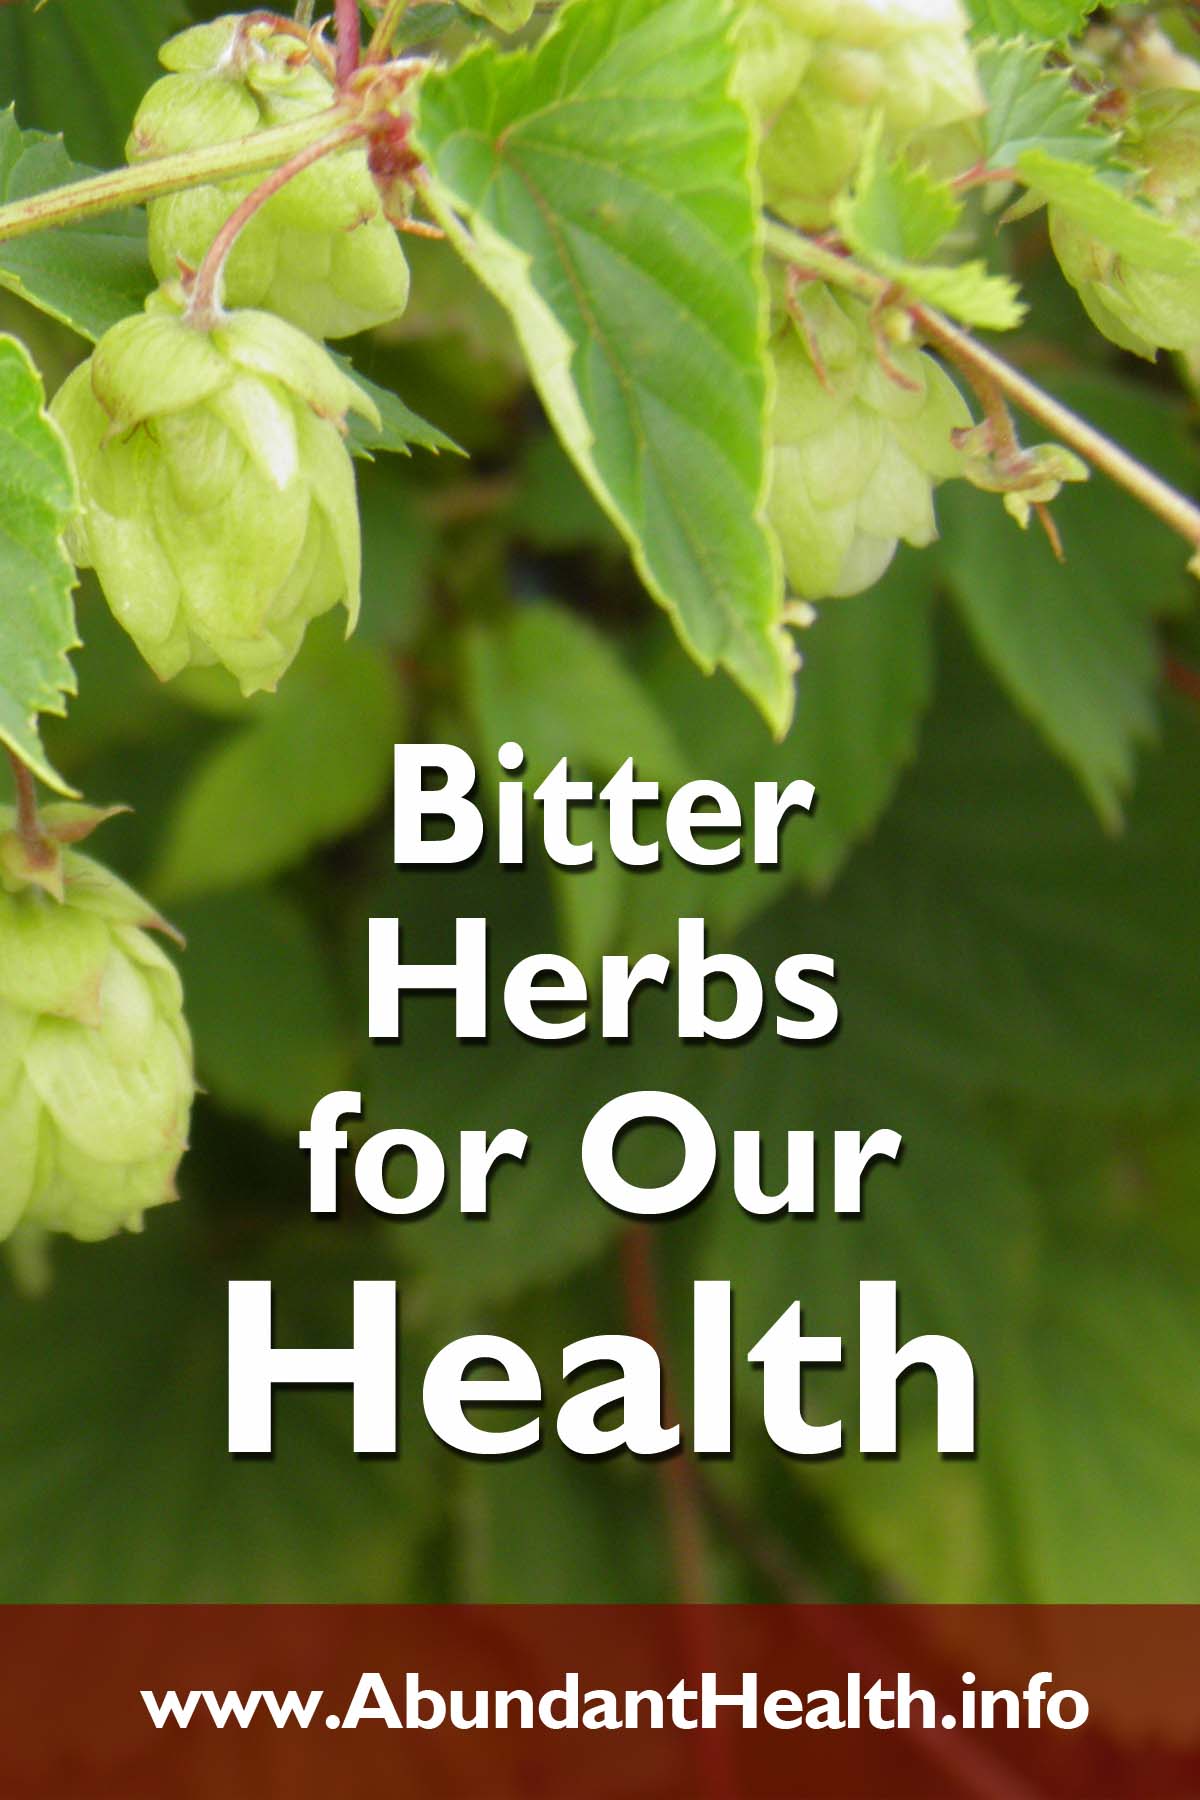 Bitter Herbs for Our Health